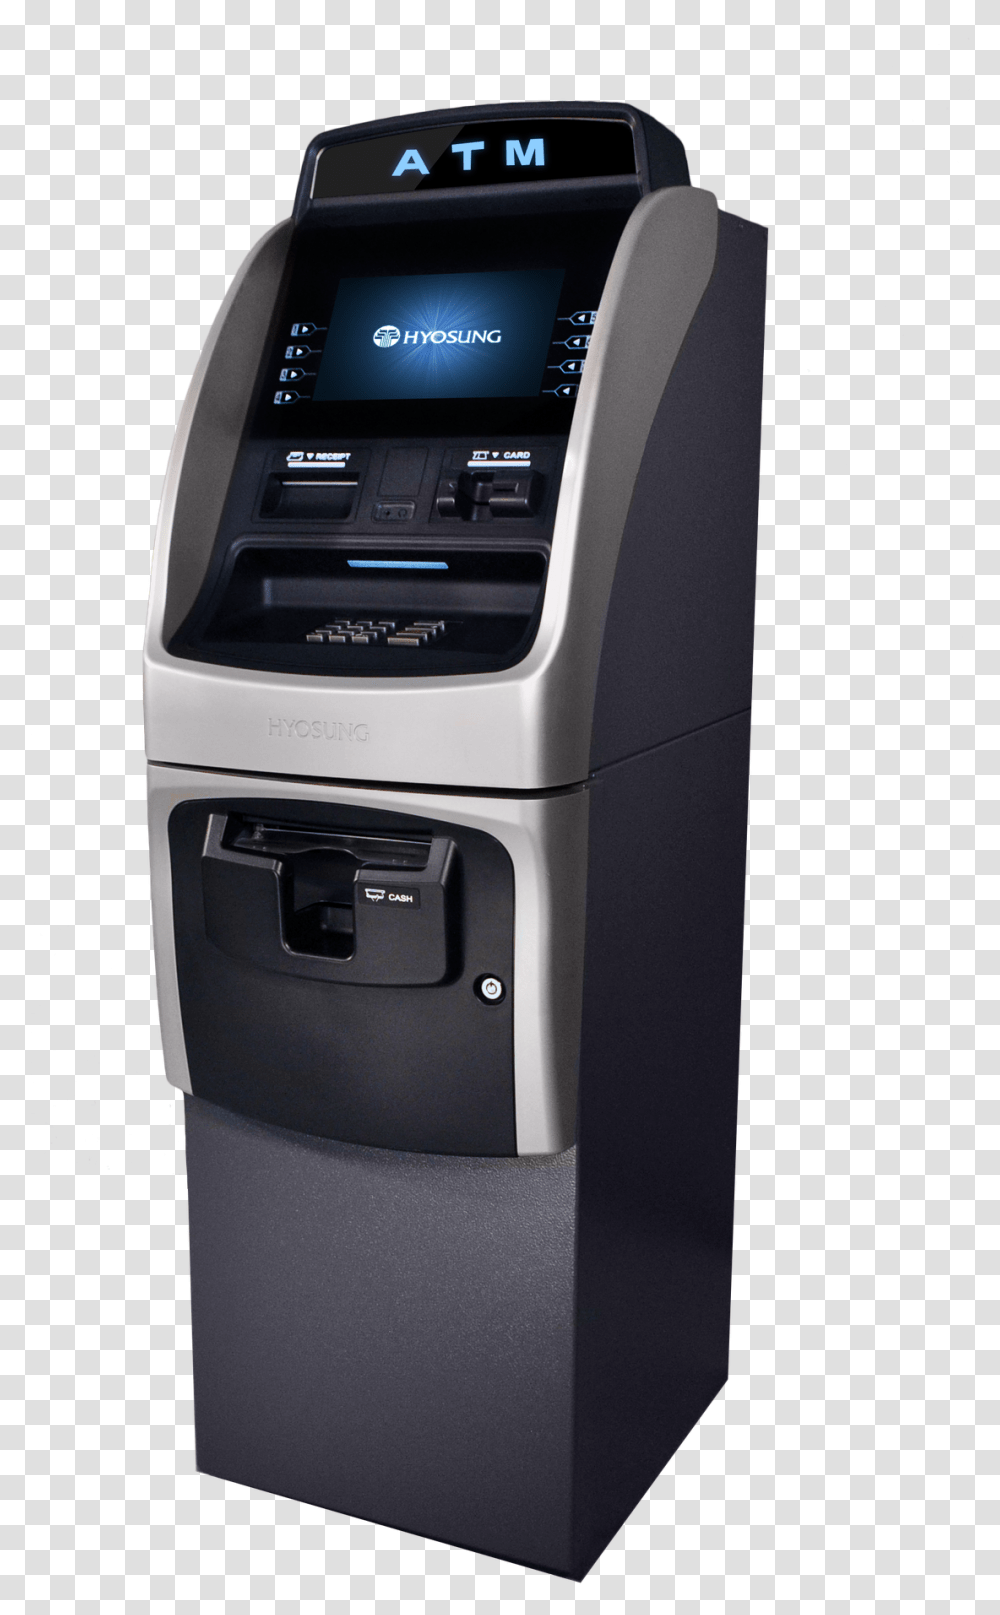 Atm Machine Image Background Hyosung Atm, Cash Machine, Mobile Phone, Electronics, Cell Phone Transparent Png